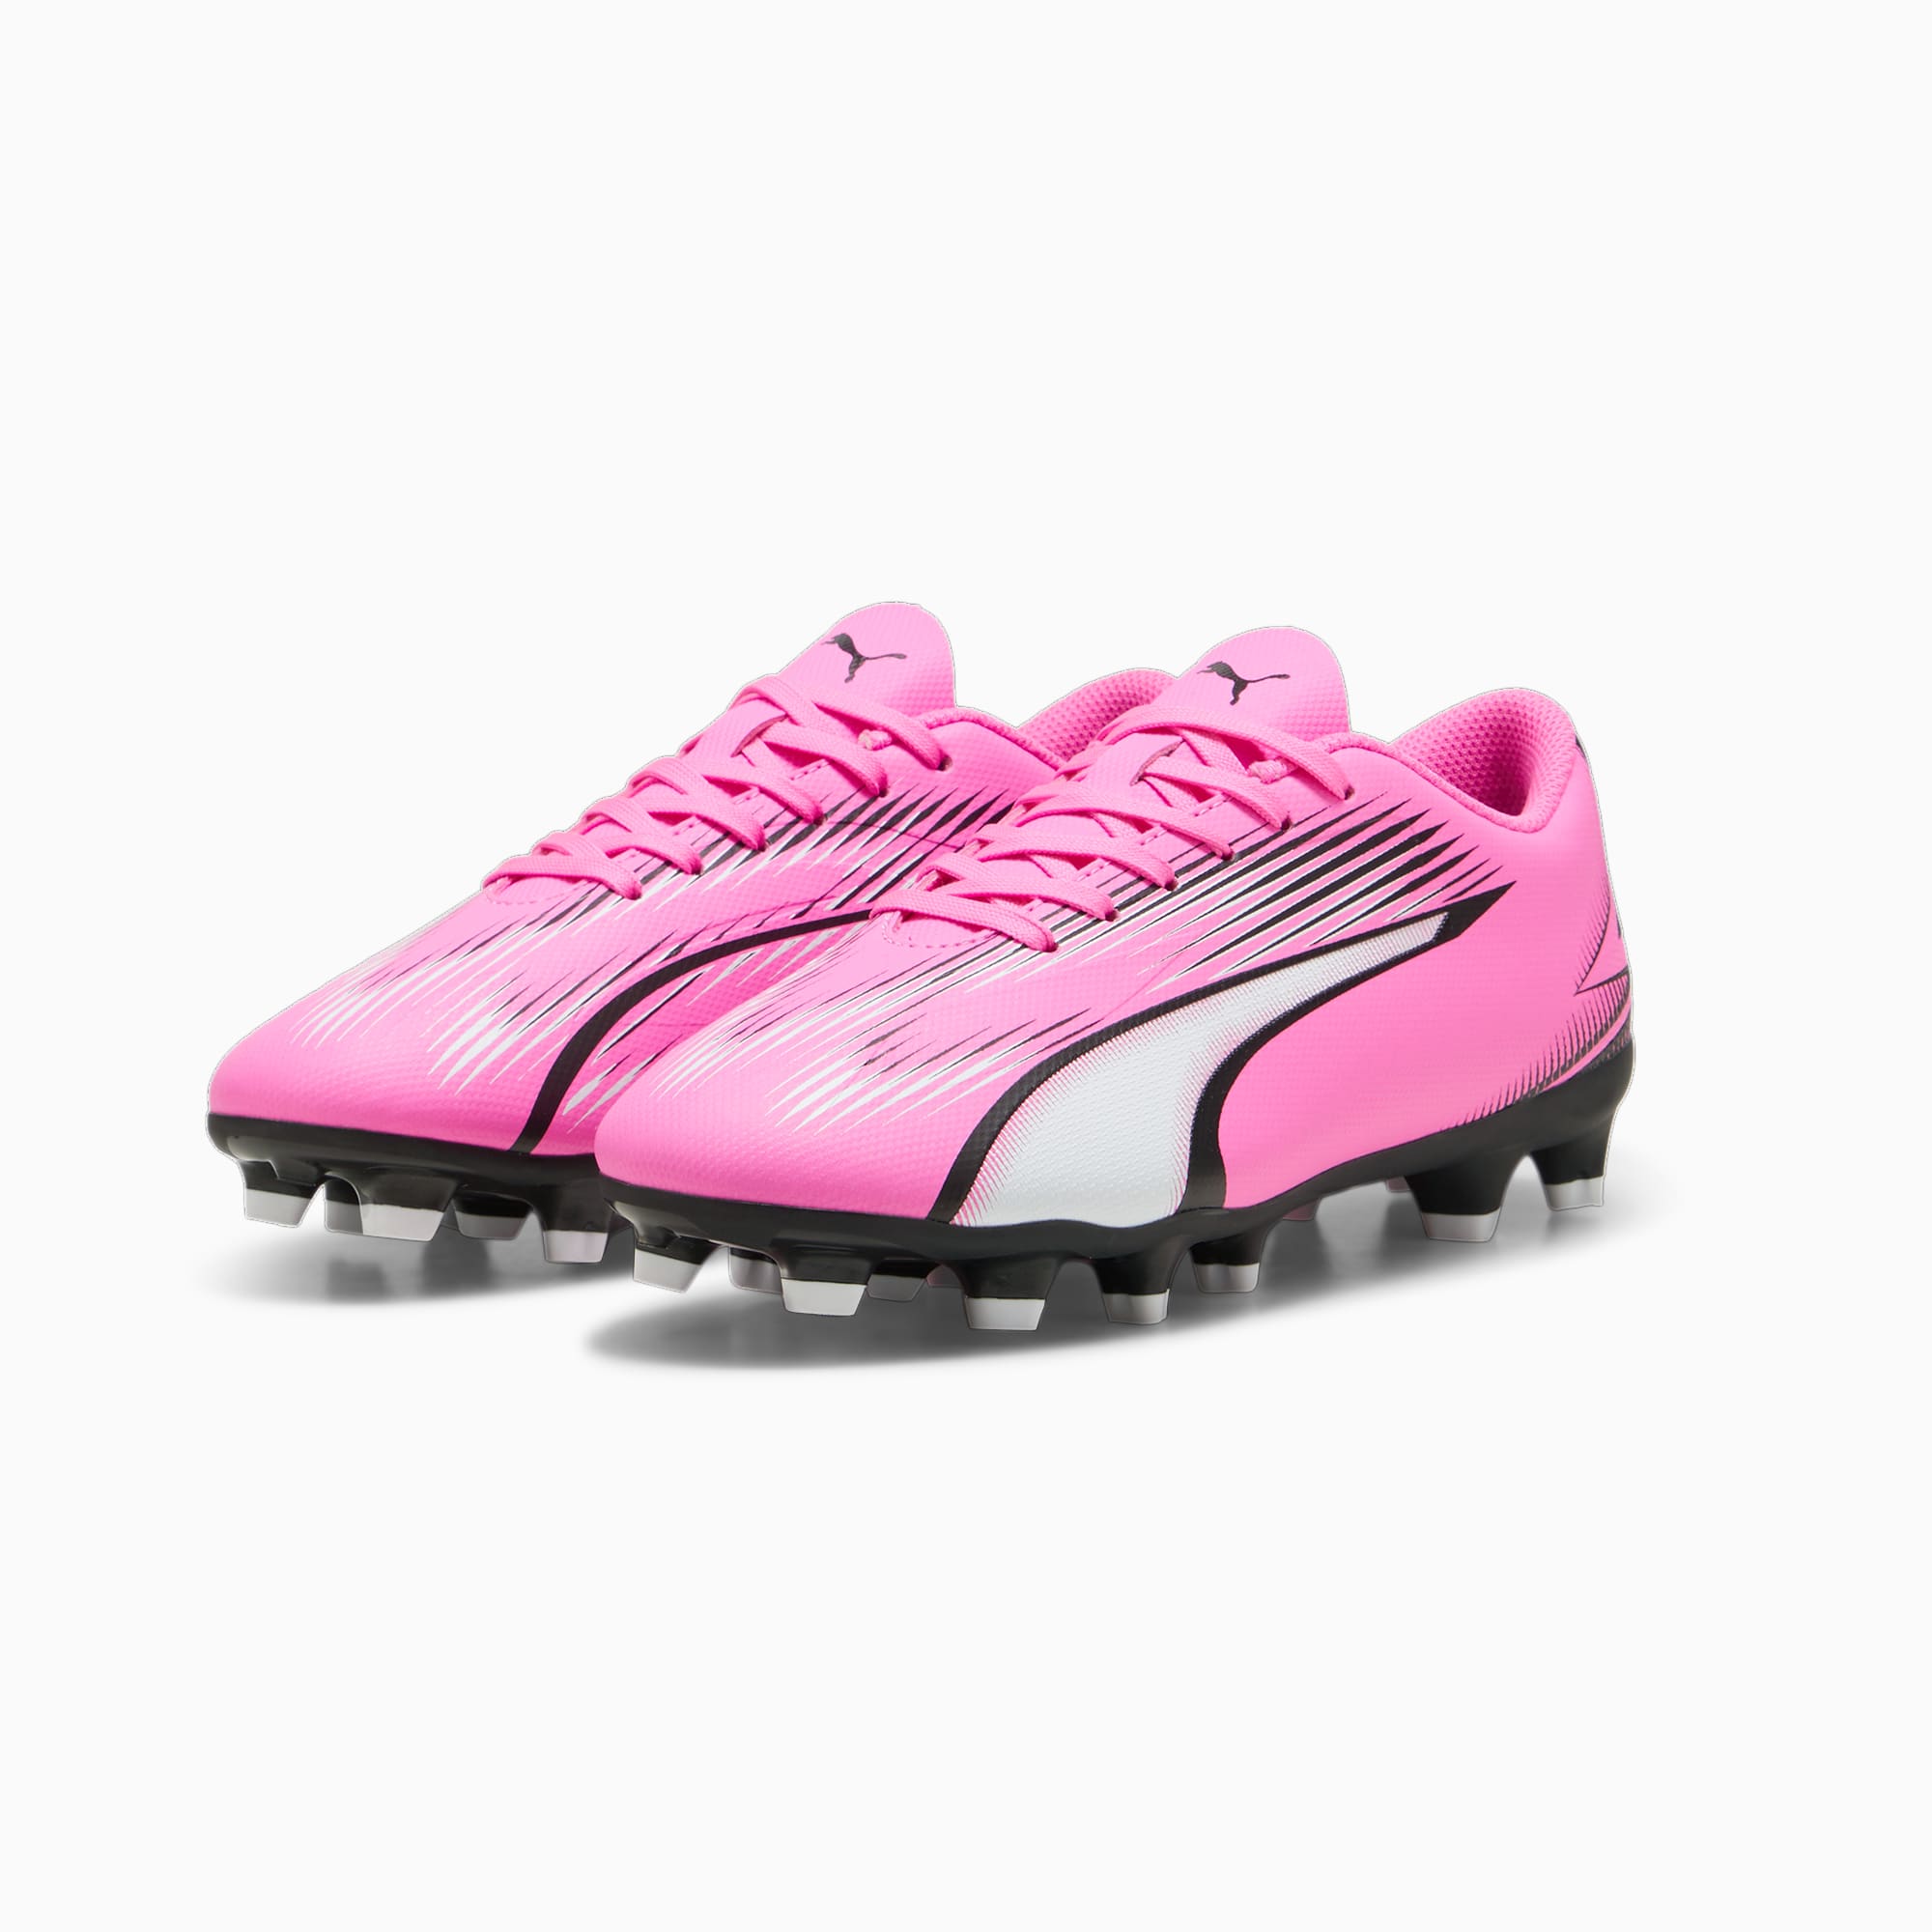 PUMA Ultra Play FG/AG Youth Football Boots, Poison Pink/White/Black